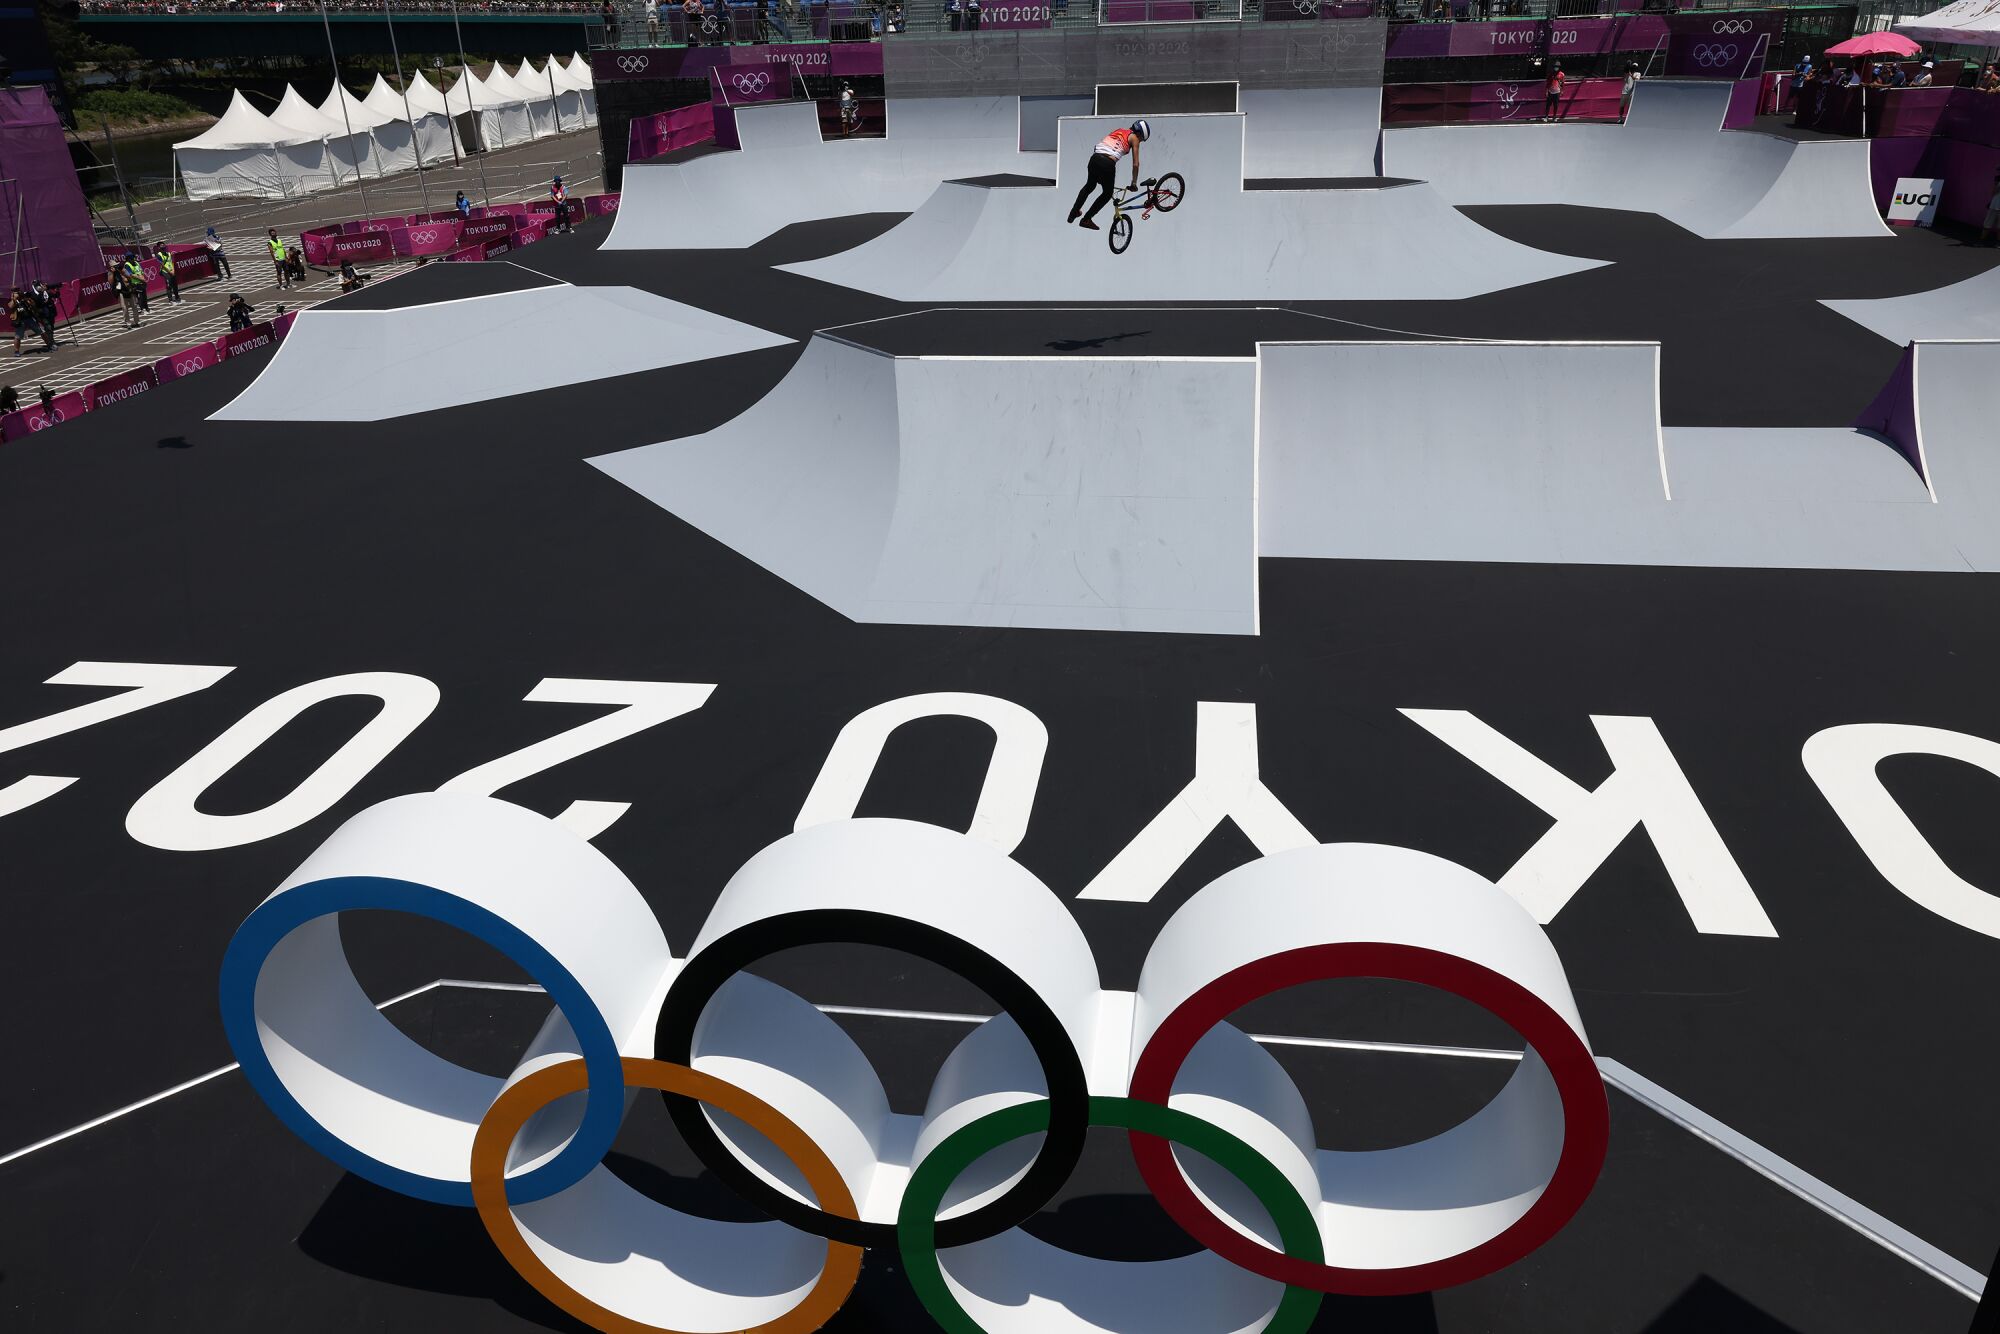 A view of the course during the Men's BMX Freestyle Finals